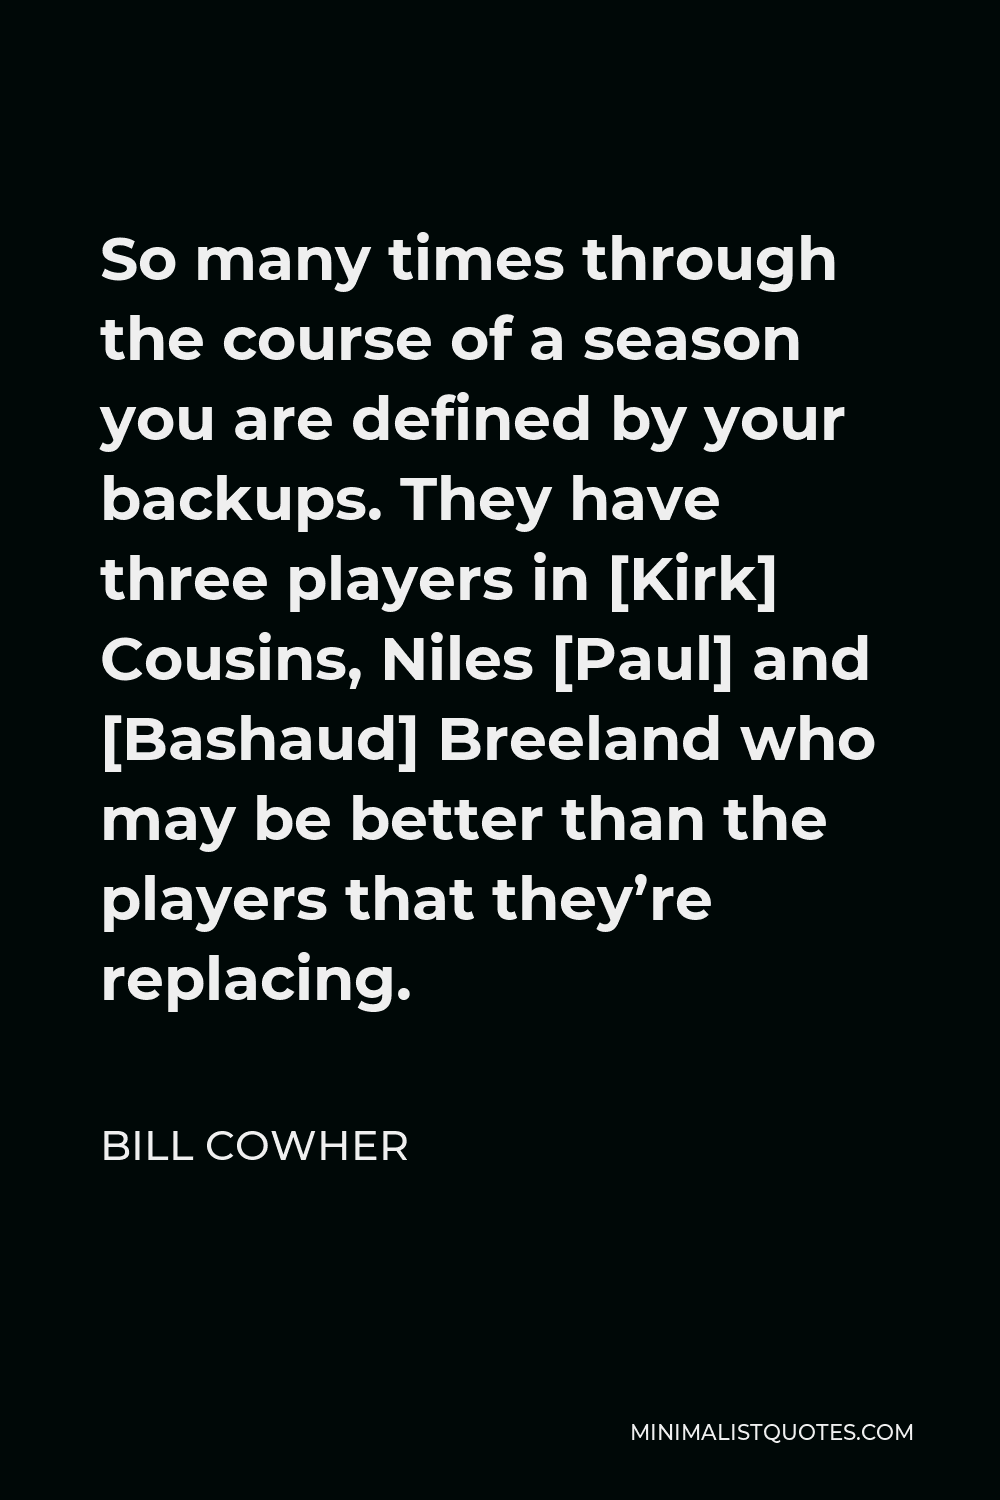 Bill Cowher Quote - So many times through the course of a season you are defined by your backups. They have three players in [Kirk] Cousins, Niles [Paul] and [Bashaud] Breeland who may be better than the players that they’re replacing.